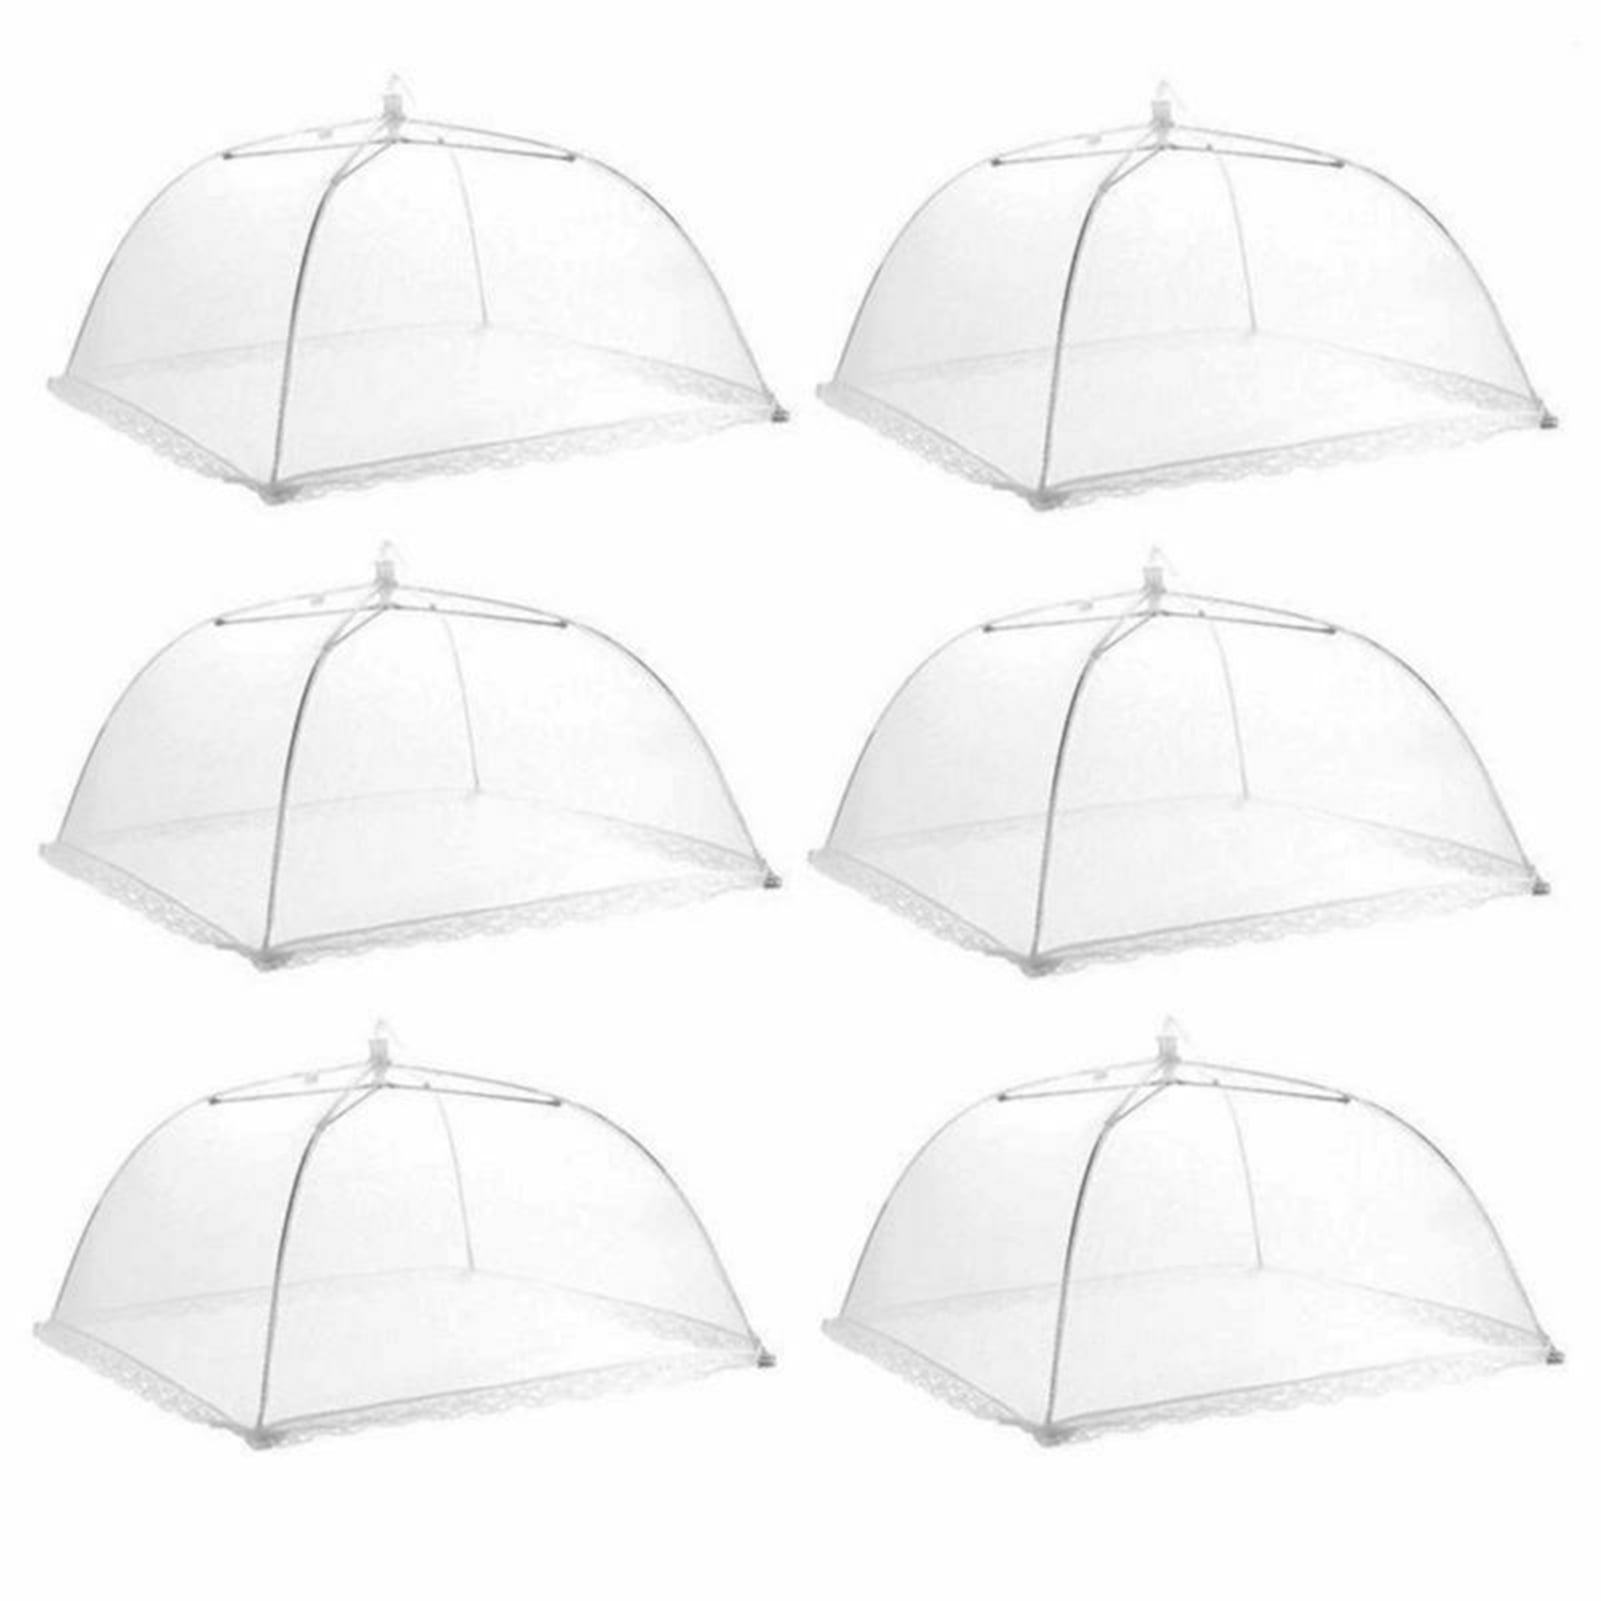 ALIGHT Umbrella Mesh Food Covers Best for Outdoor Picnics Barbecues 4 Pack 